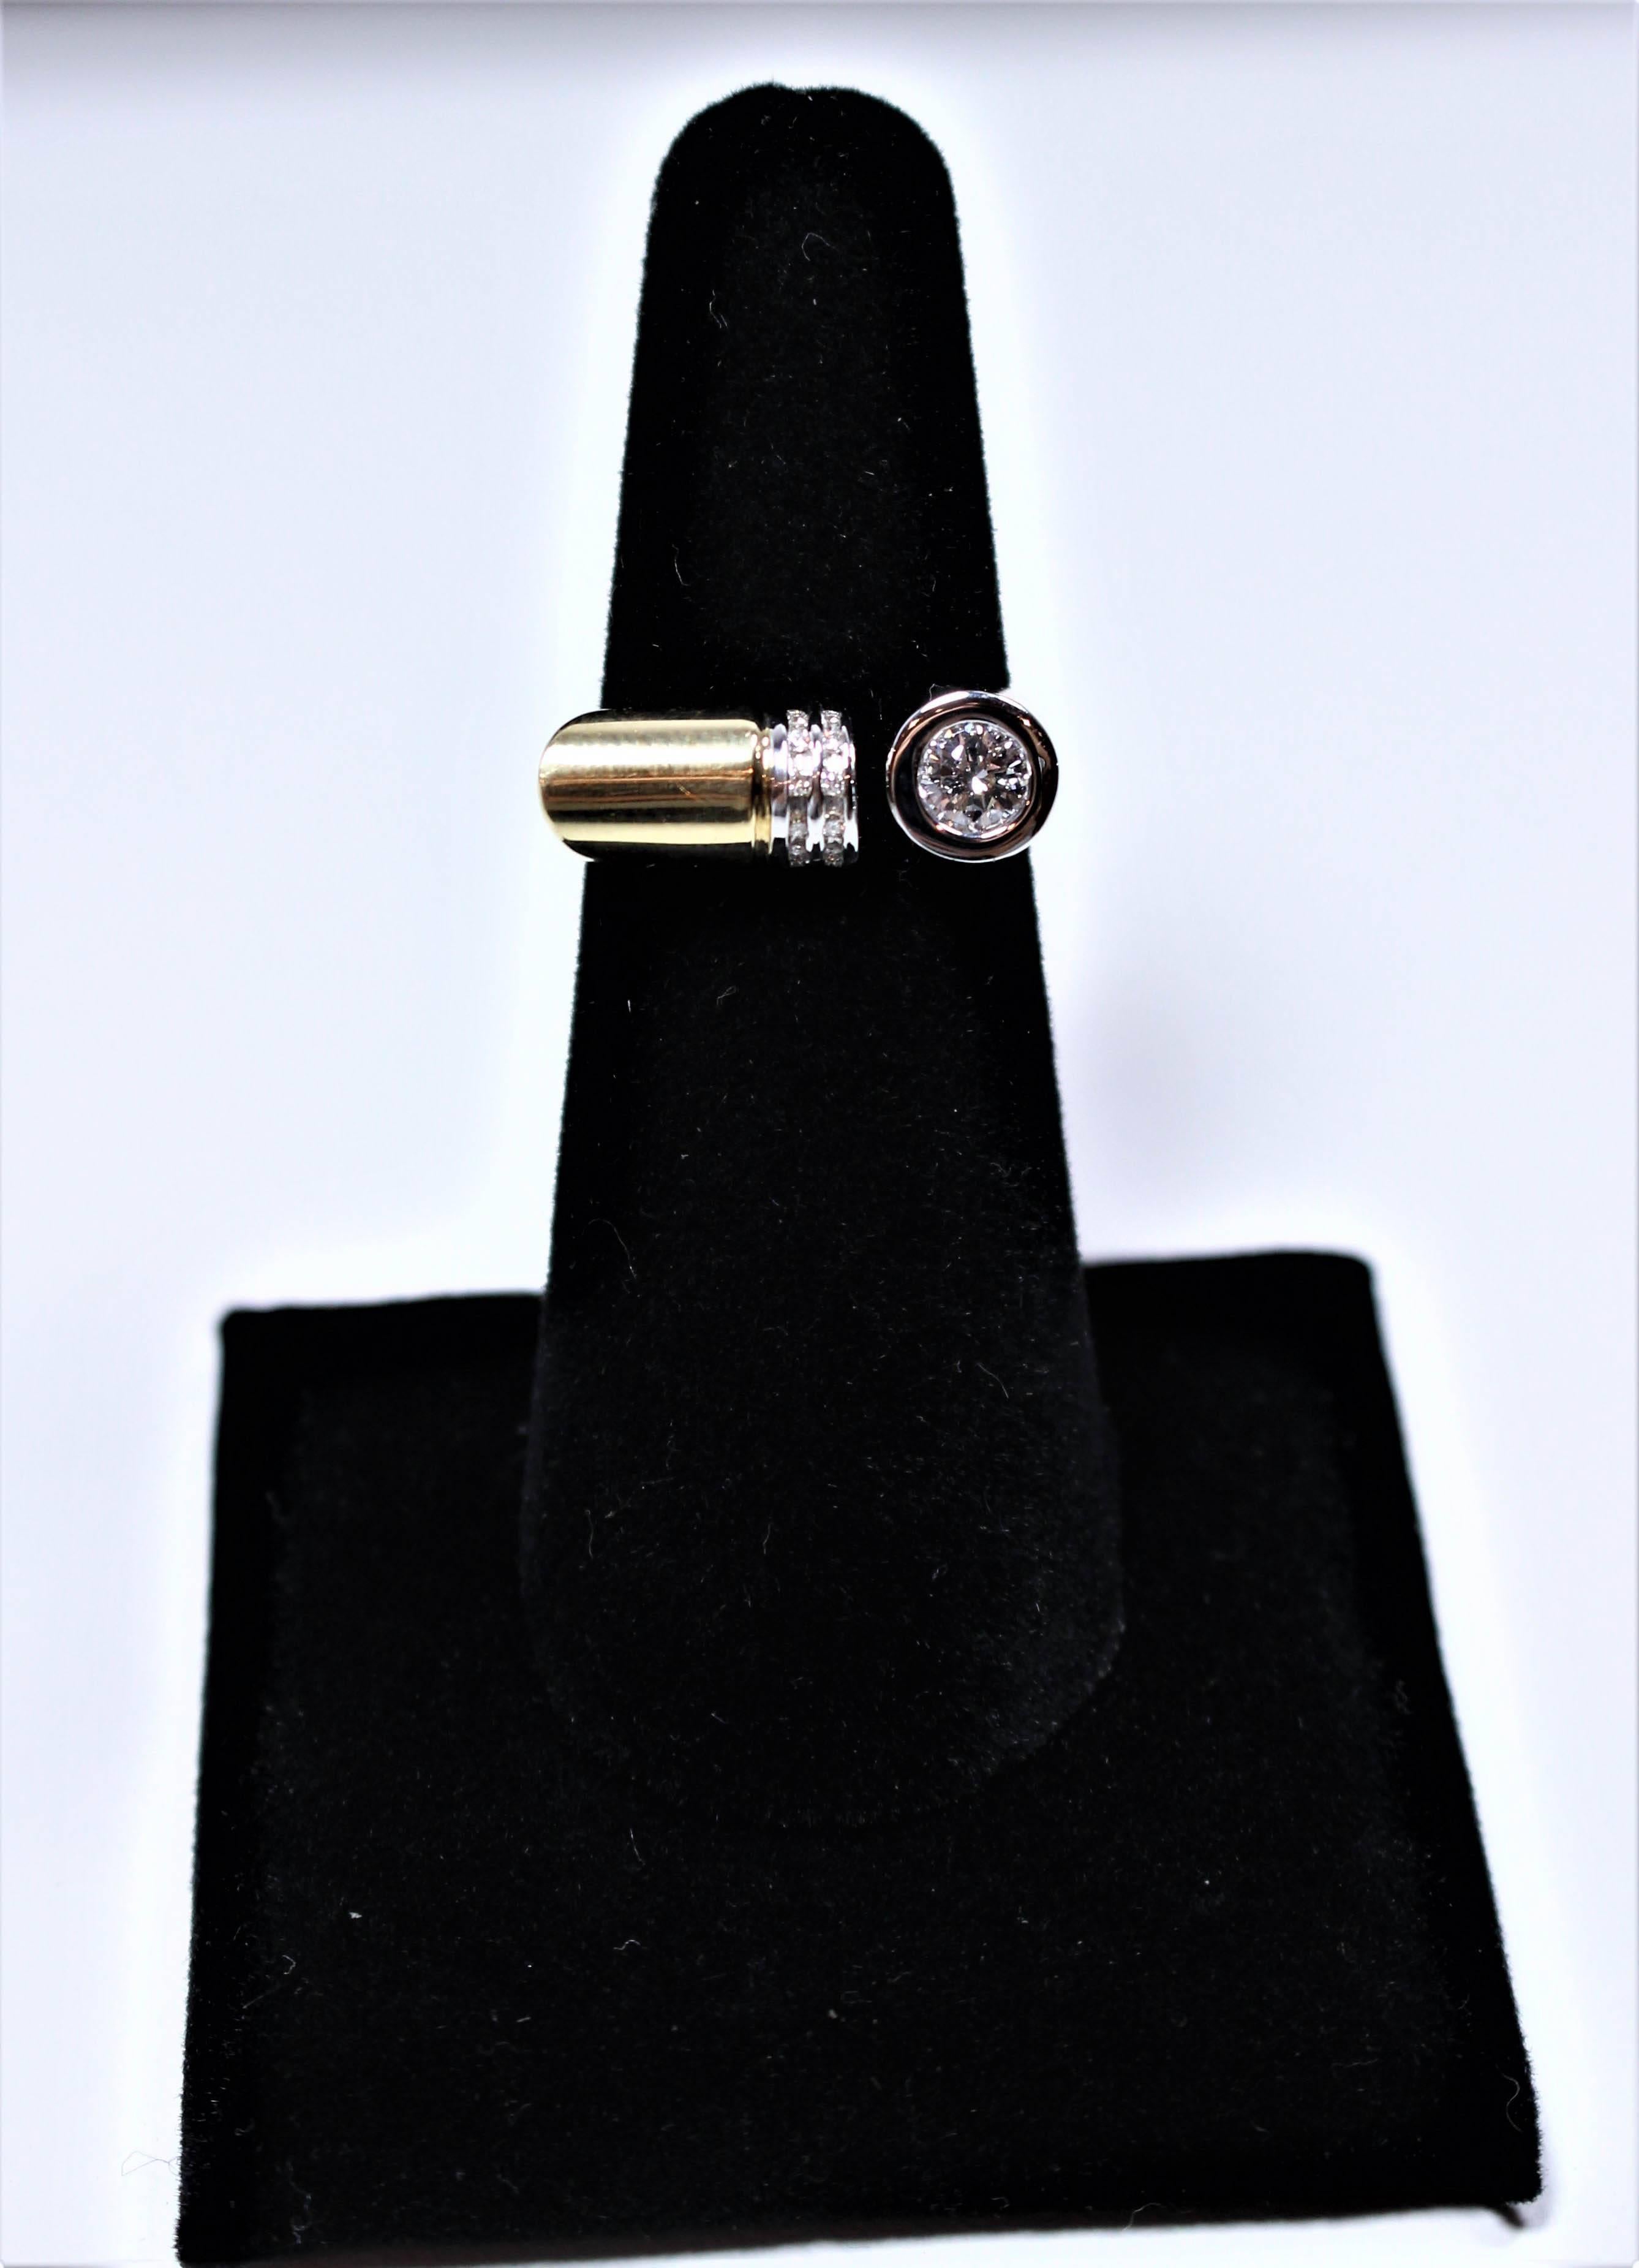 This ring is composed of a combination of 14kt white and yellow gold. Features an abstract style with pave and bezel set diamonds. This ring has a round cut bezel set stone with an approximate carat weight of 0.35 and 14 round cut pave set diamonds